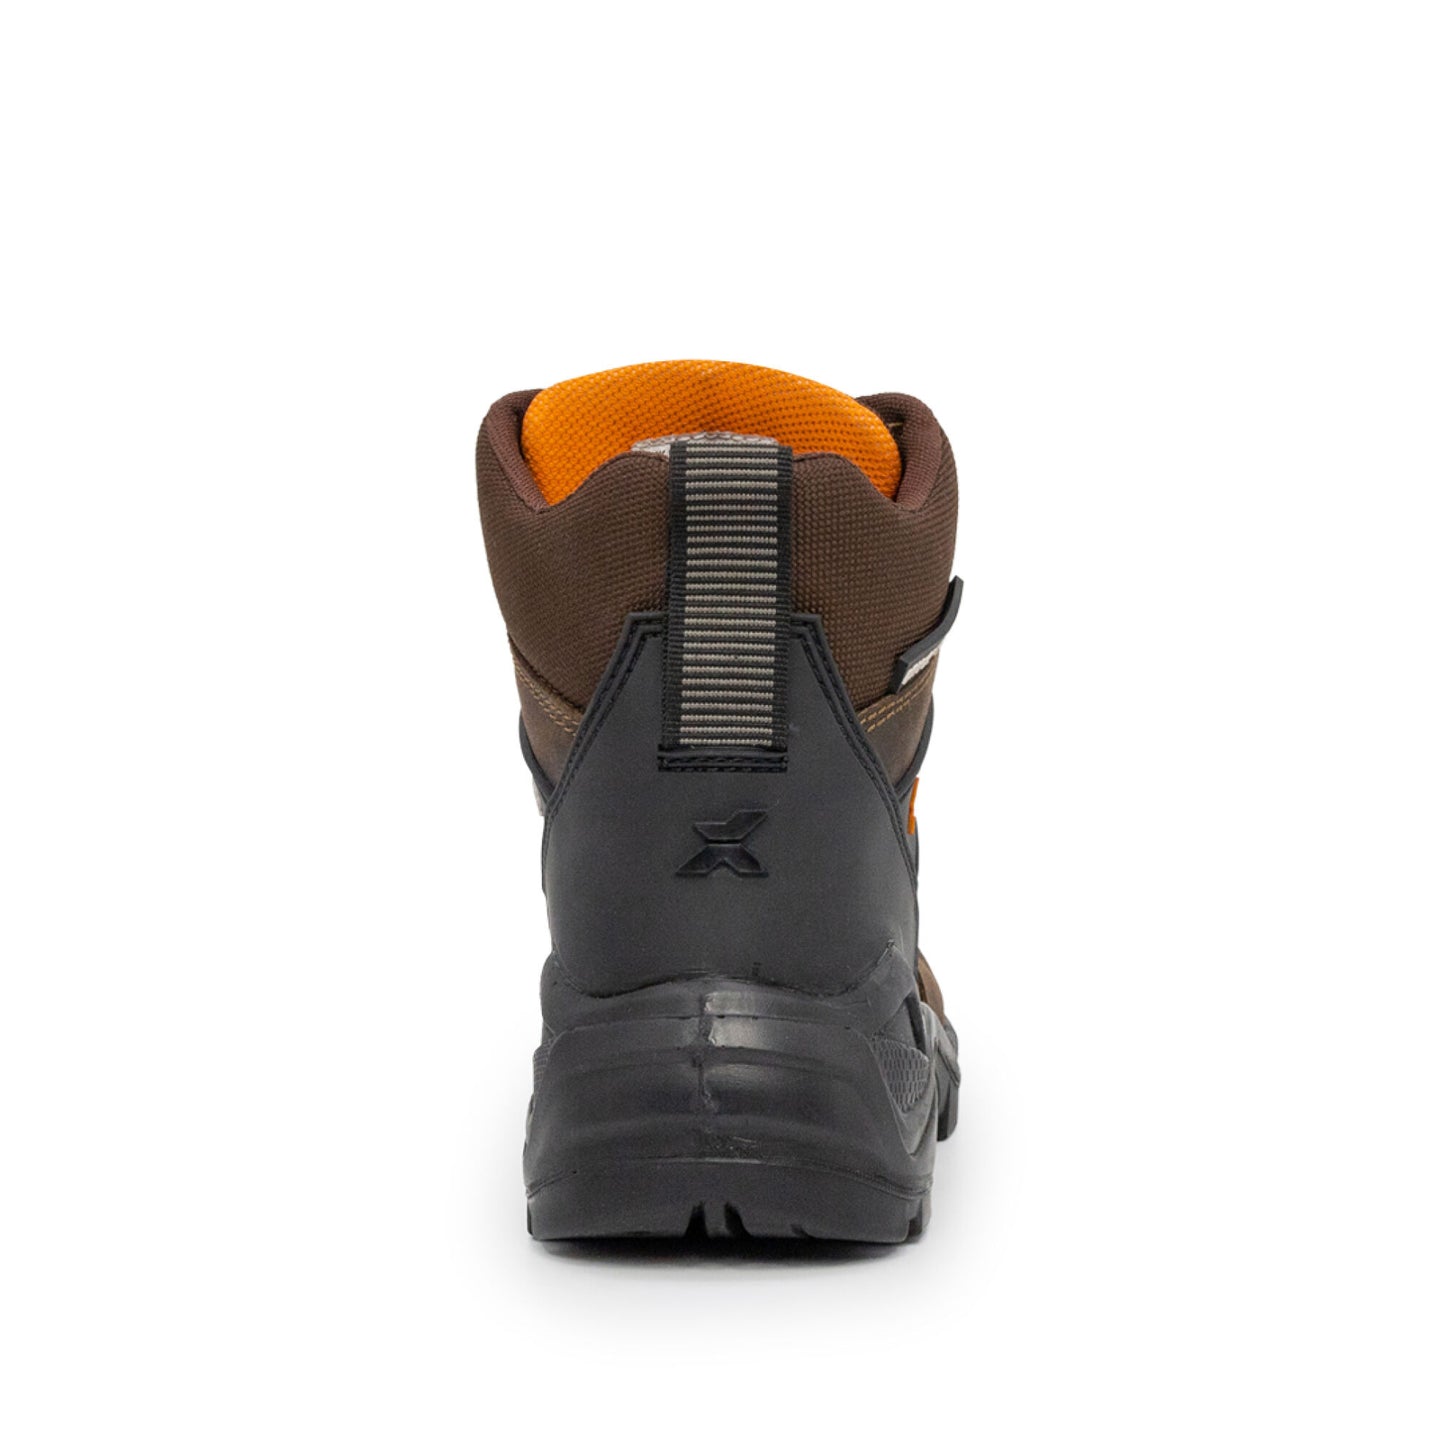 Xpert Typhoon S3 Safety Laced Boot - Brown